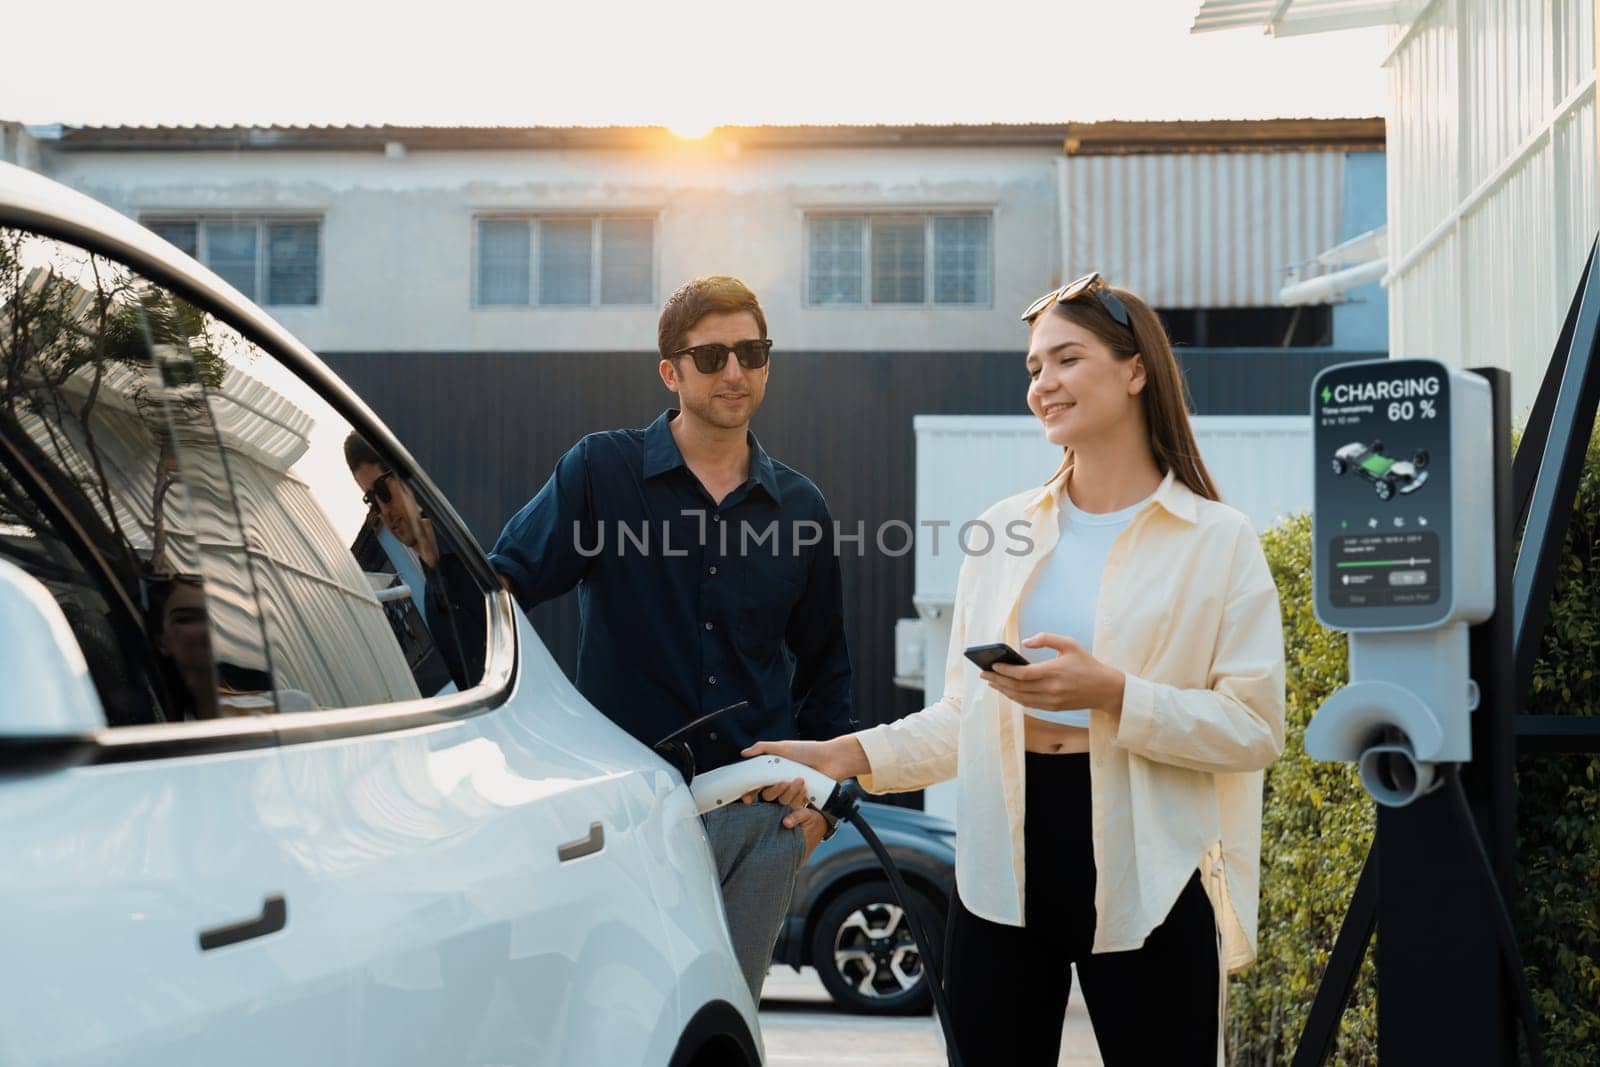 Young couple recharging EV vehicle from home charging station. Expedient by biancoblue